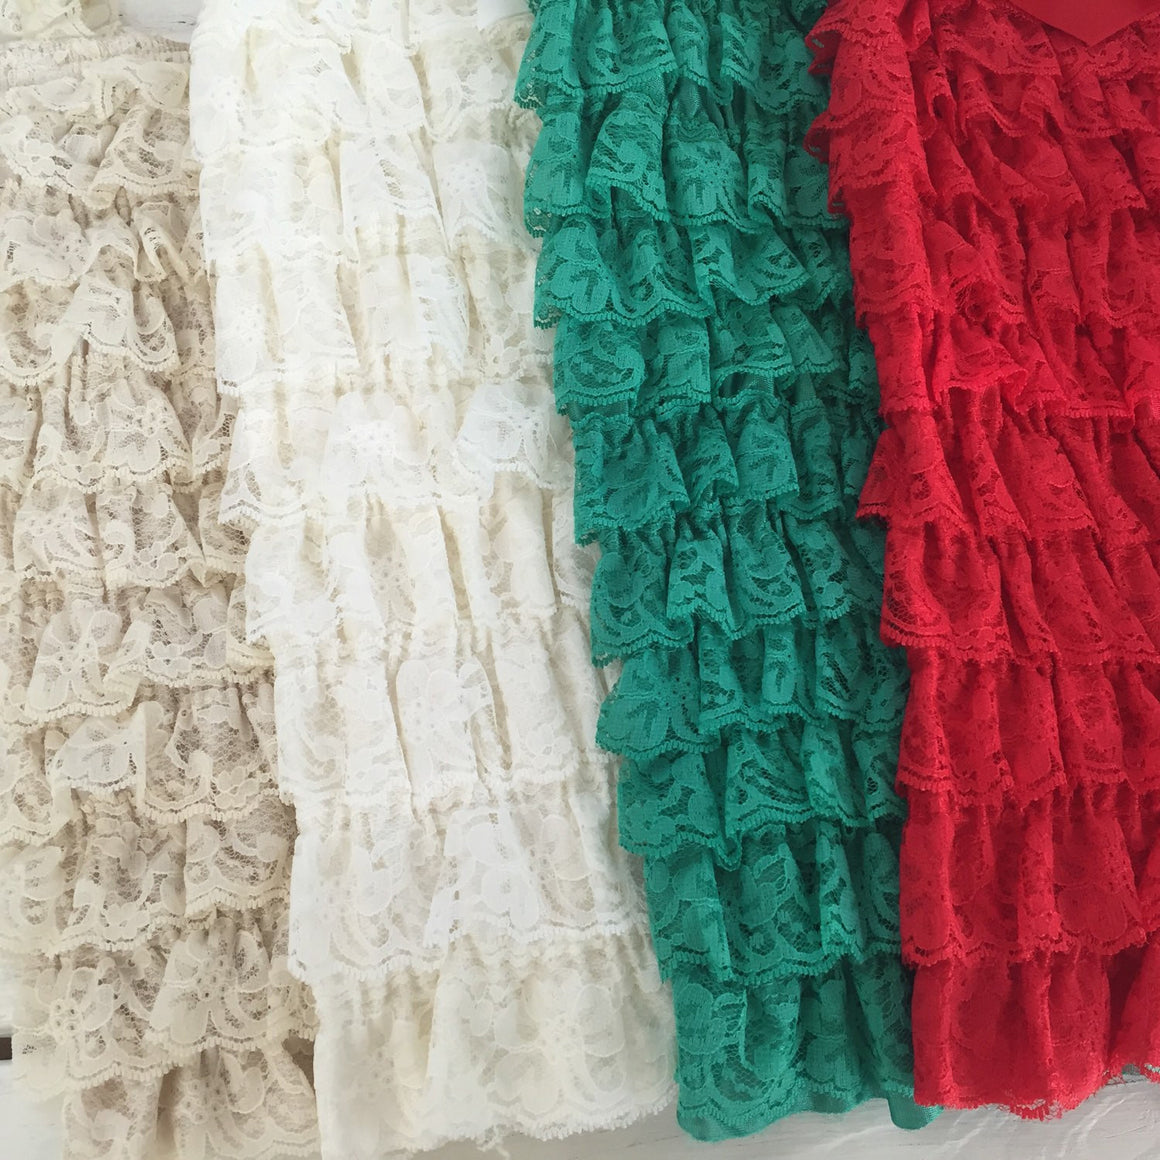 Lace Petti Romper - Red, Green, Ivory, Champagne - HoneyLoveBoutique